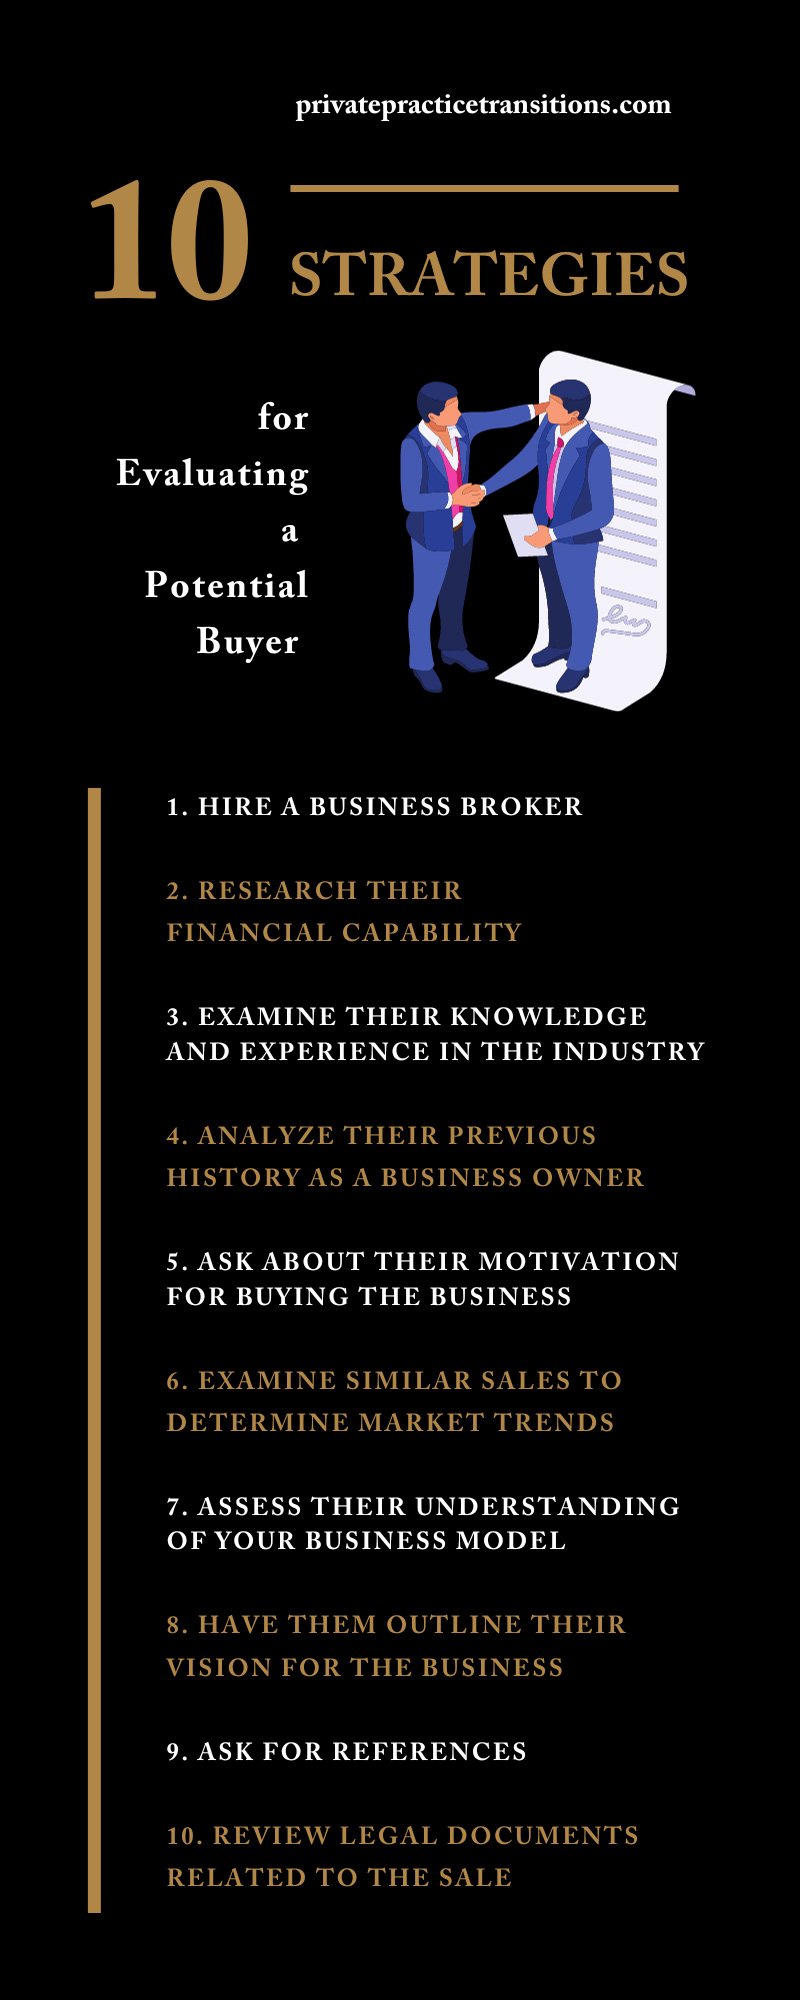 10 Strategies for Evaluating a Potential Buyer